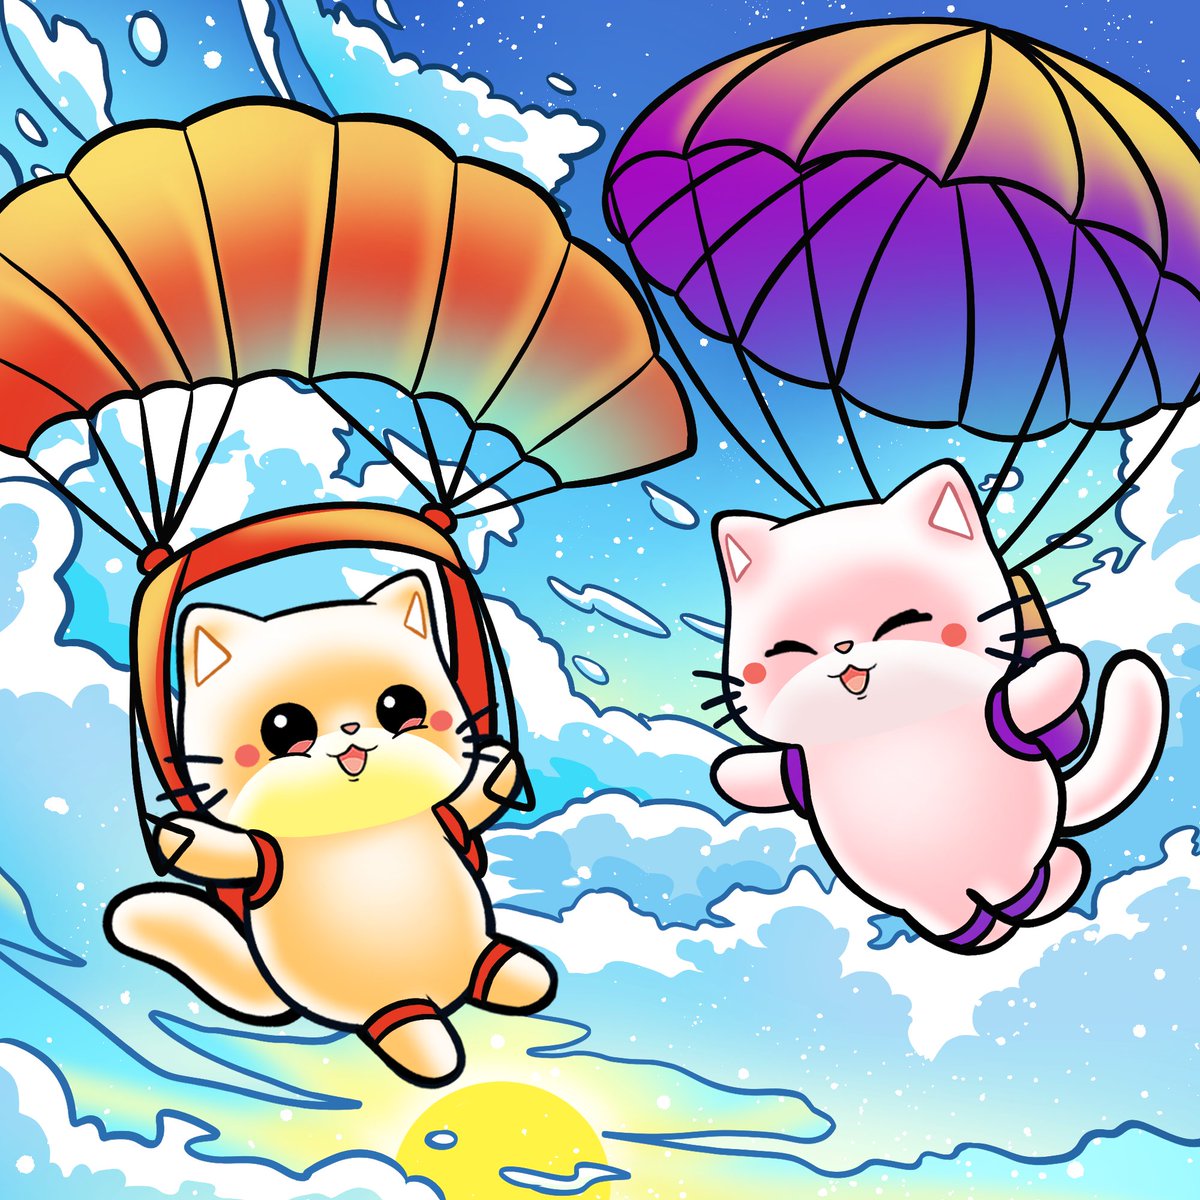 There are only 2 more days to mint 'Mochimonchain Summer' and be airdropped 1000 $MOCHI on June 3rd. See the quoted tweet for the mint.

#OnchainSummer coming in hot!